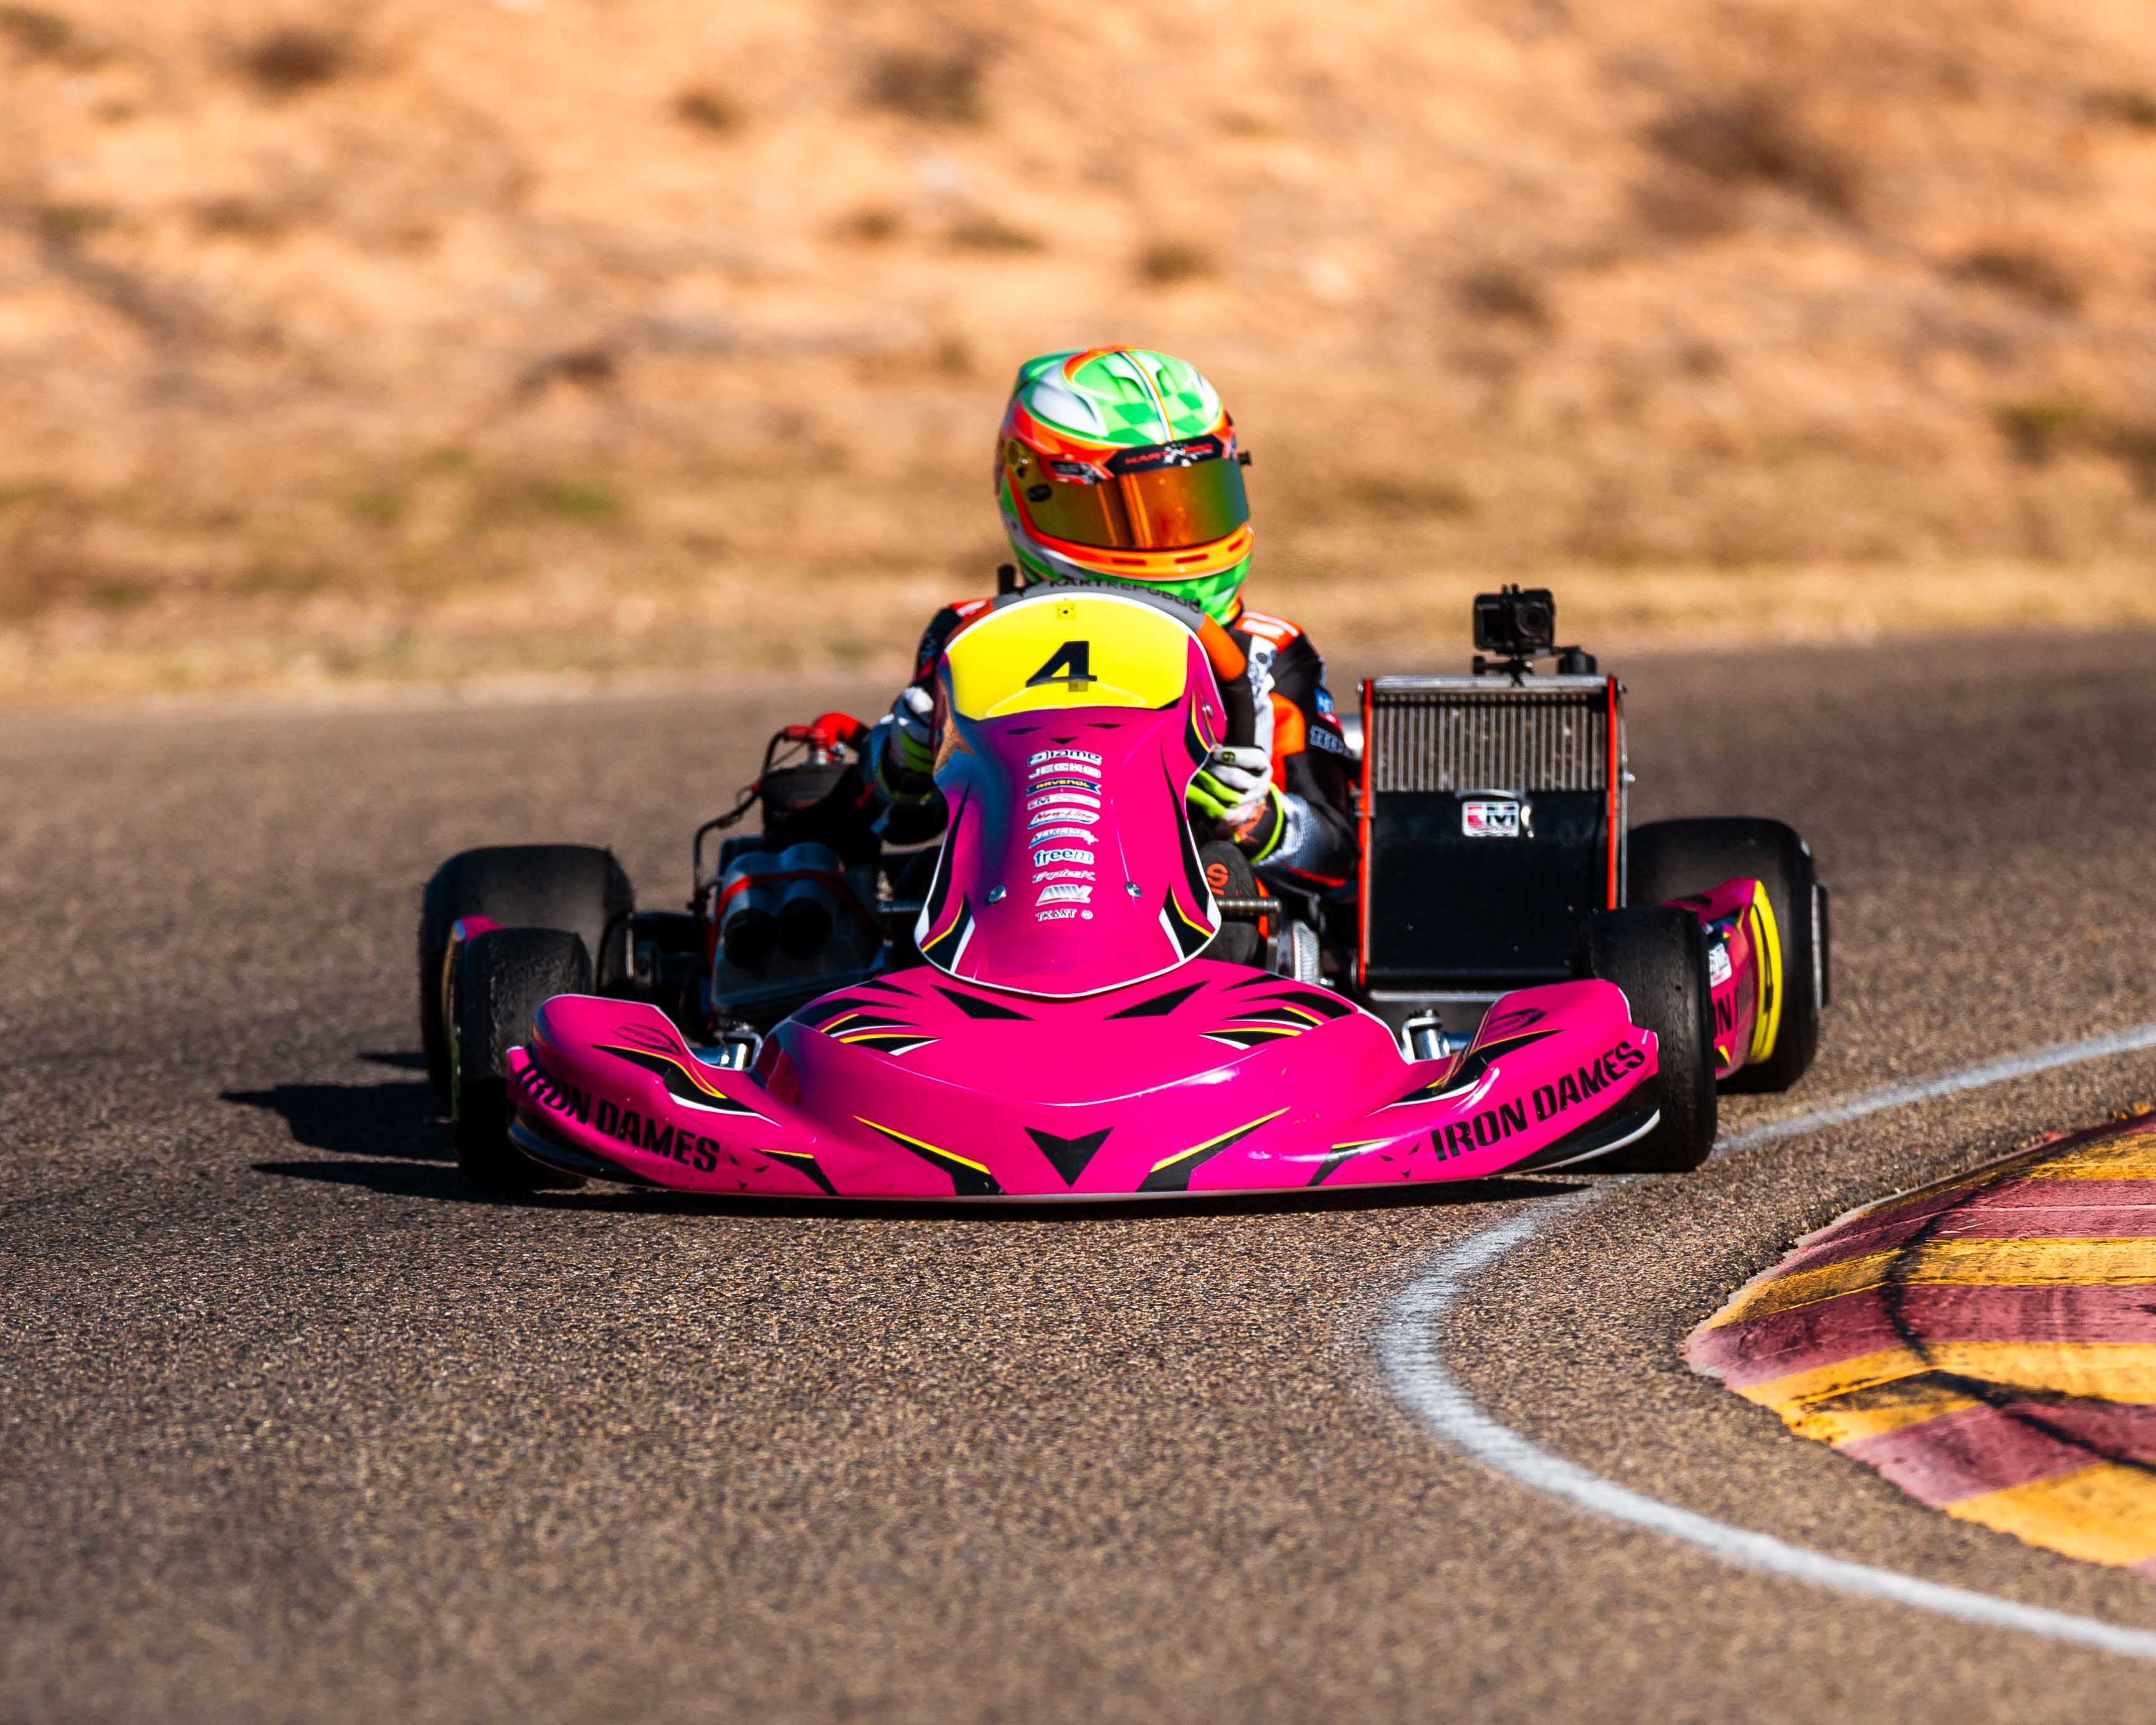 French driver Mia Oger driving for Iron Dames in a karting race